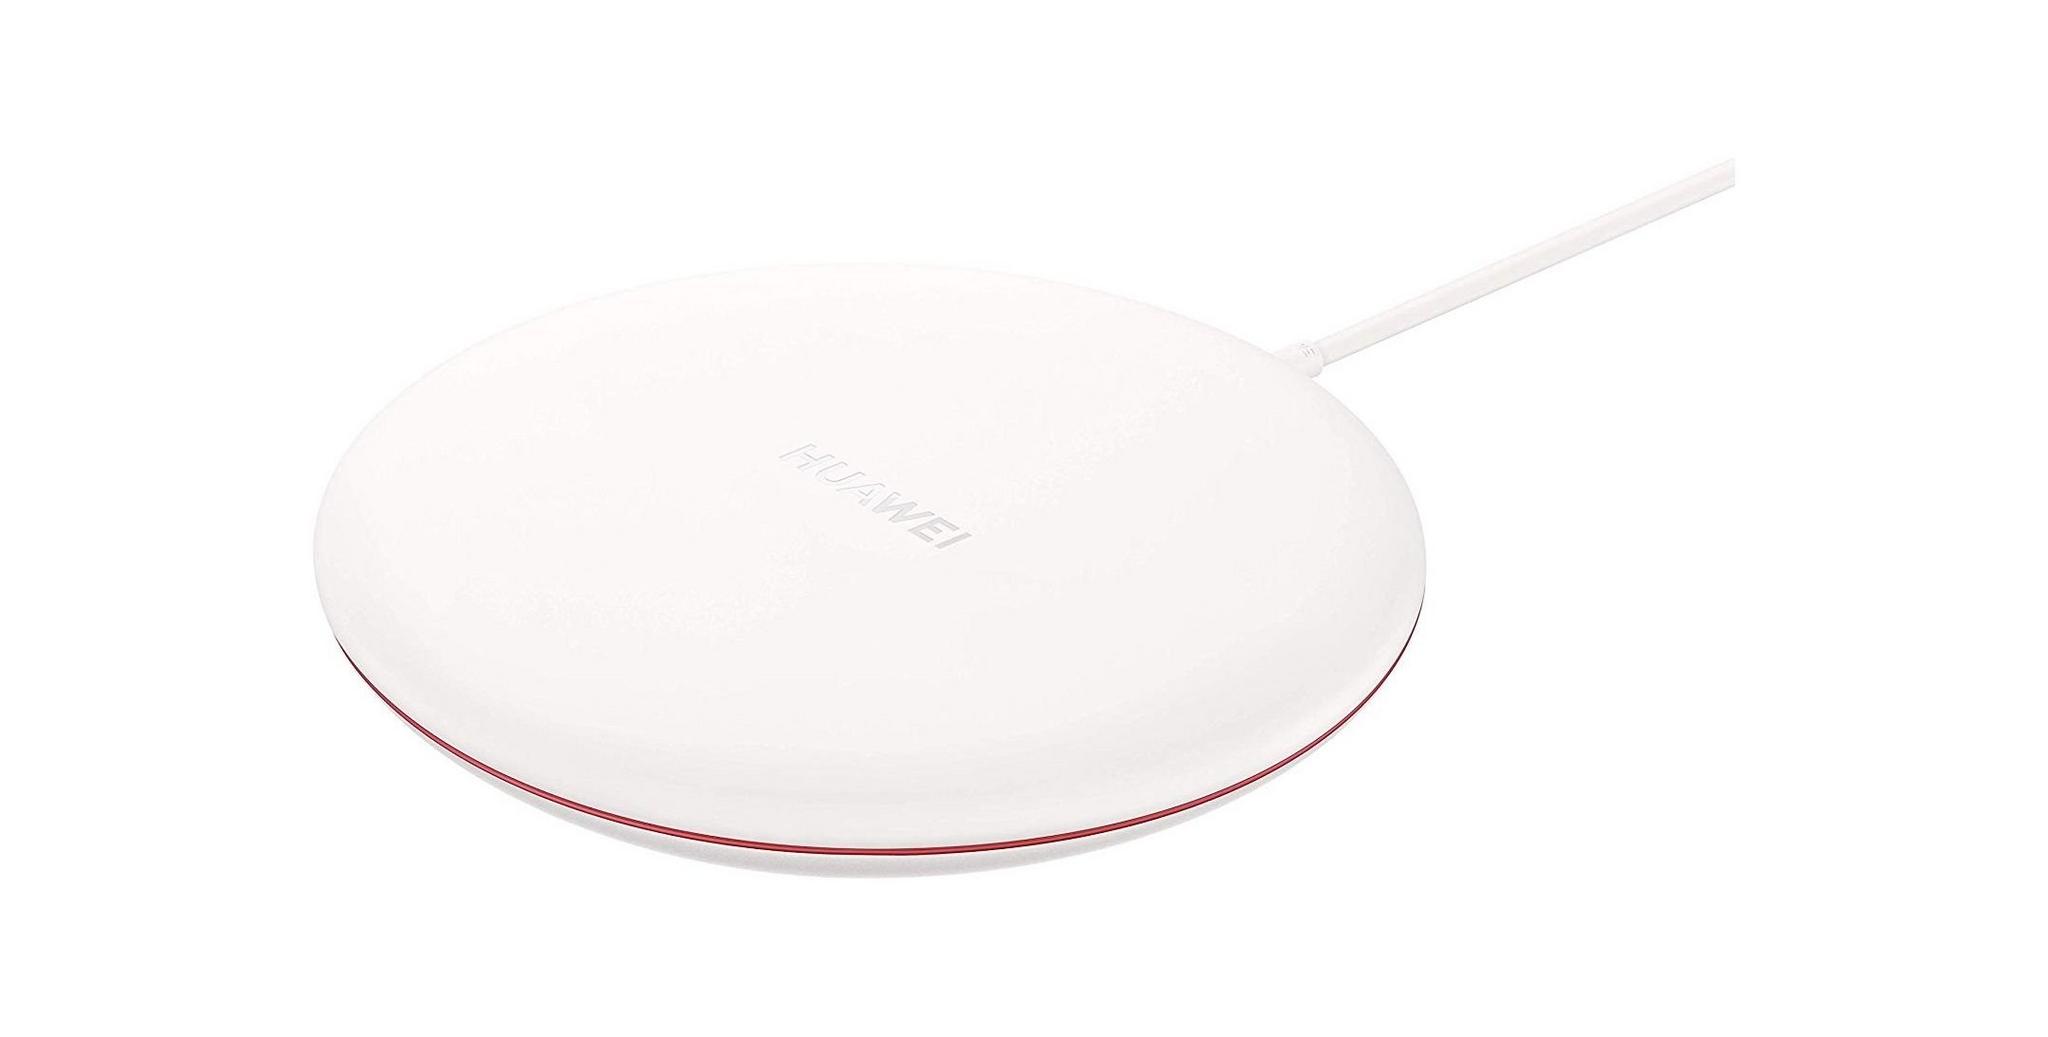 Huawei CP60 15W Type-C Wireless Charger - White